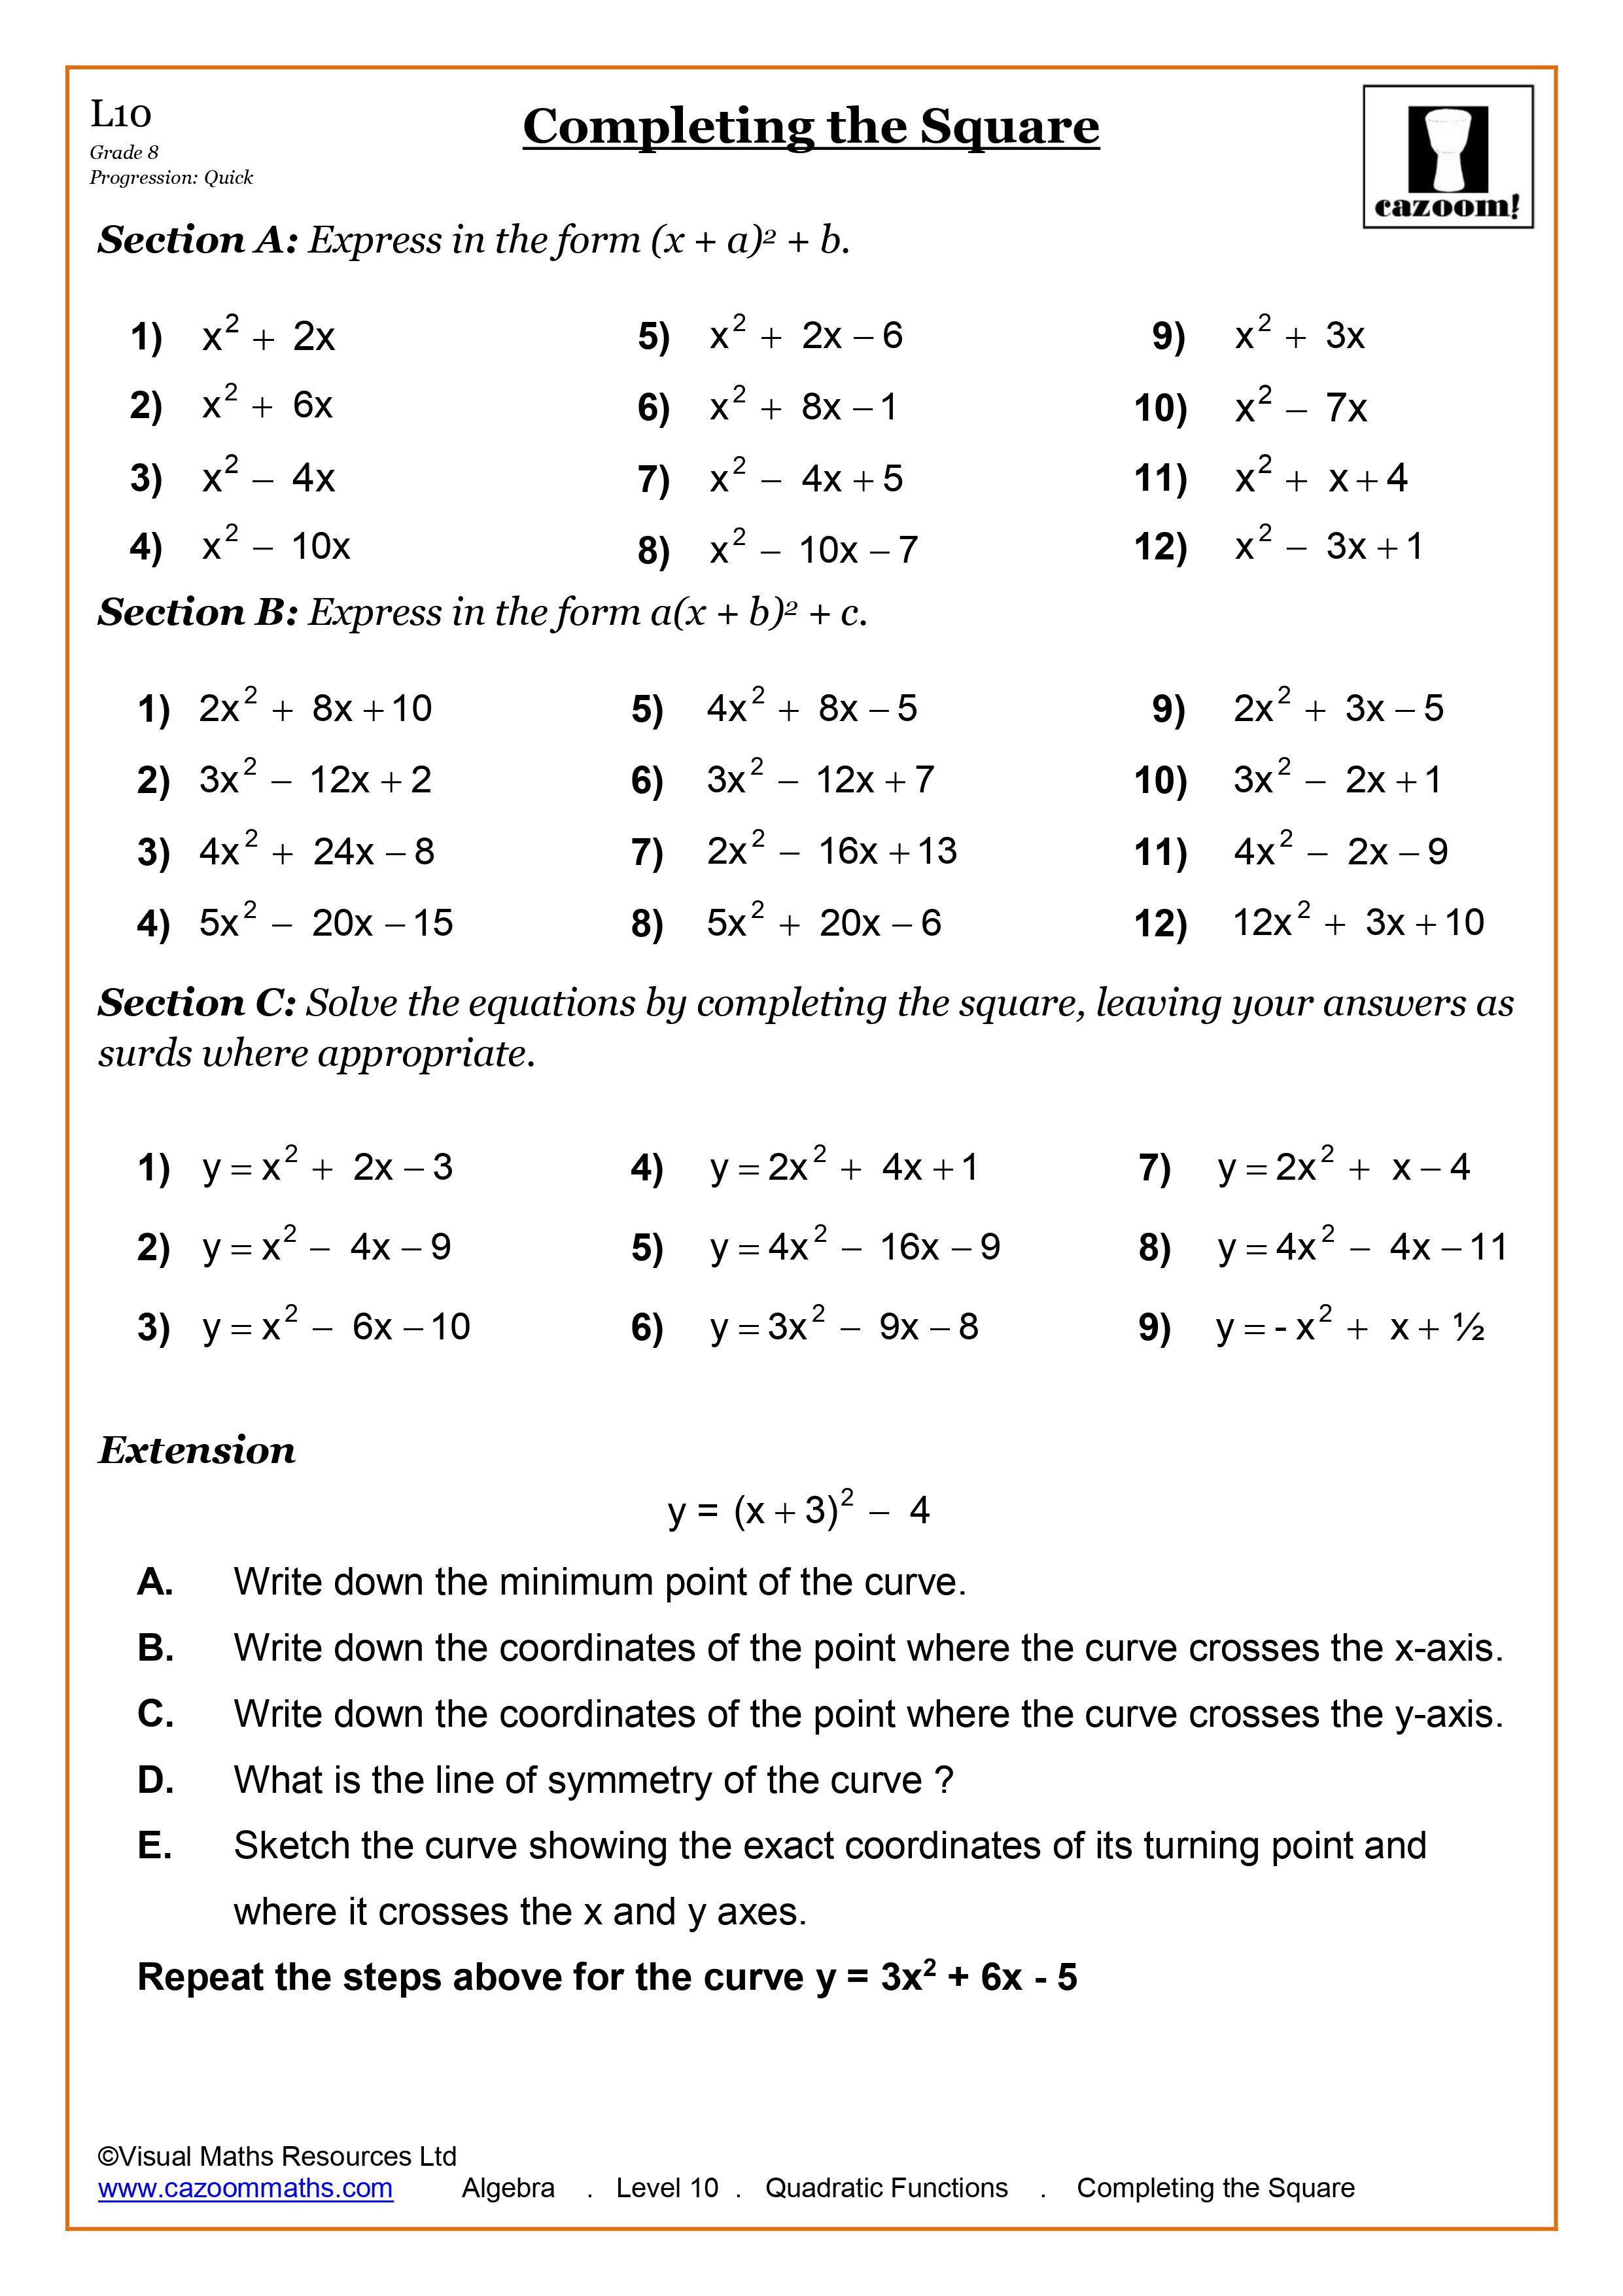 cazoom-maths-on-twitter-here-s-a-free-maths-worksheet-for-you-to